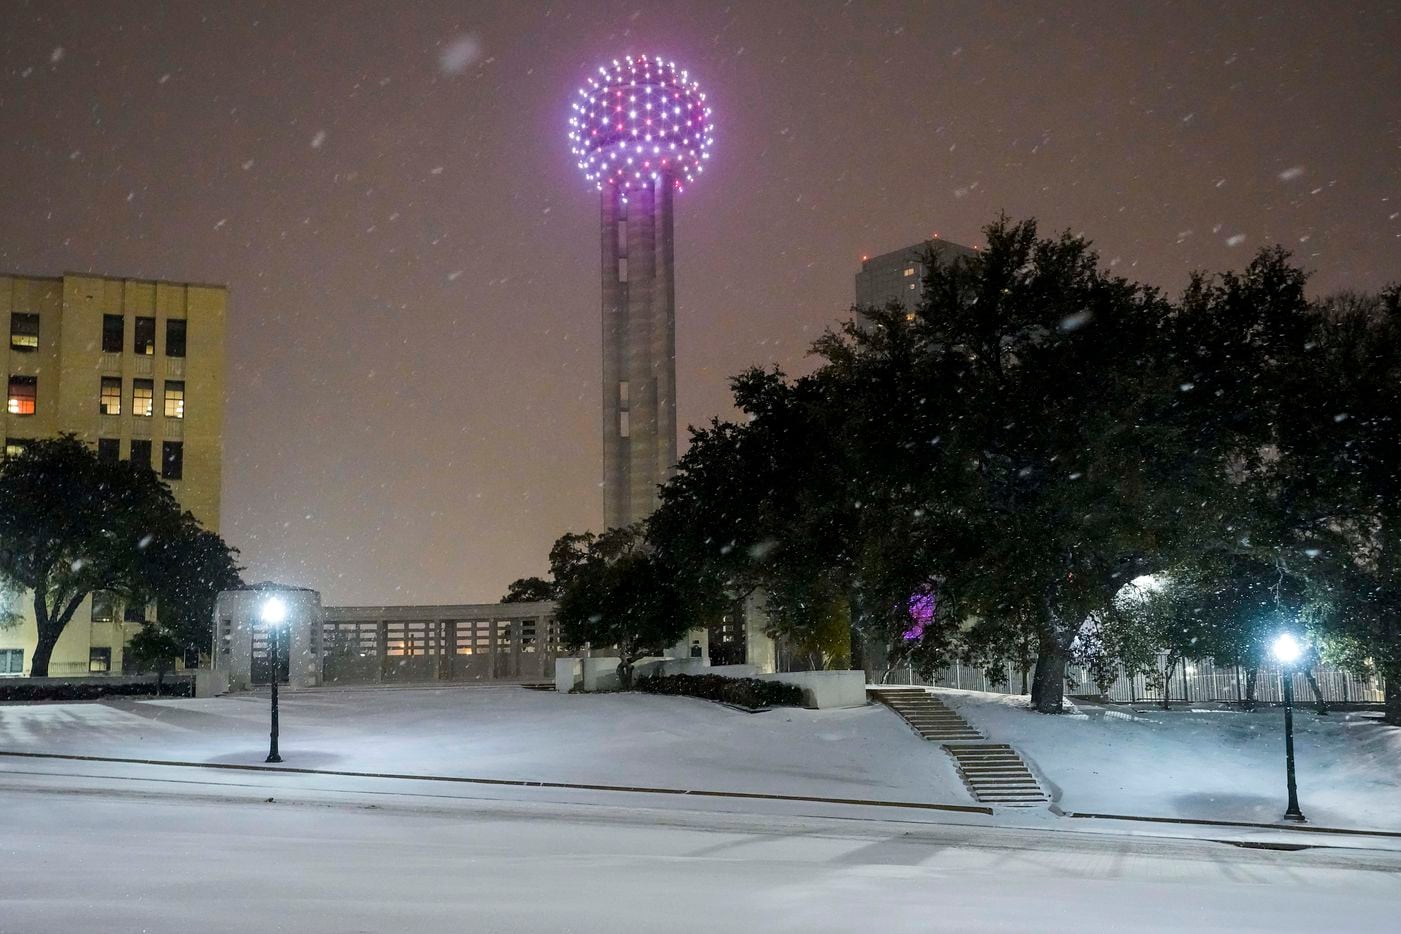 Snow falls on Dealy Plaza and Reunion Tower downtown as a winter storm brings snow and freezing temperatures to North Texas on Sunday, Feb. 14, 2021, in Dallas.